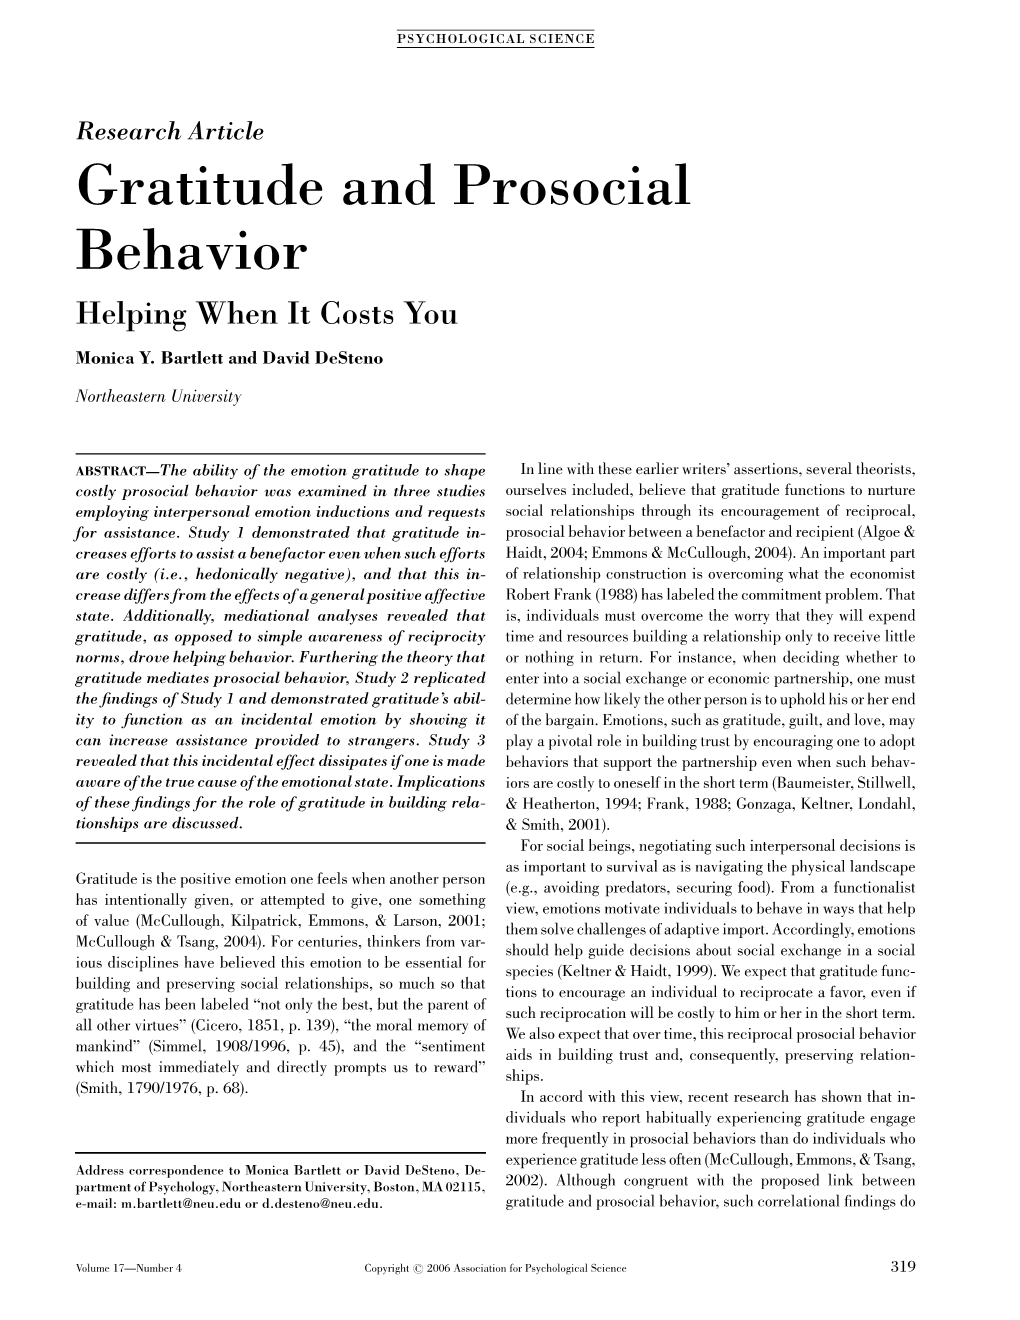 Gratitude and Prosocial Behavior Helping When It Costs You Monica Y